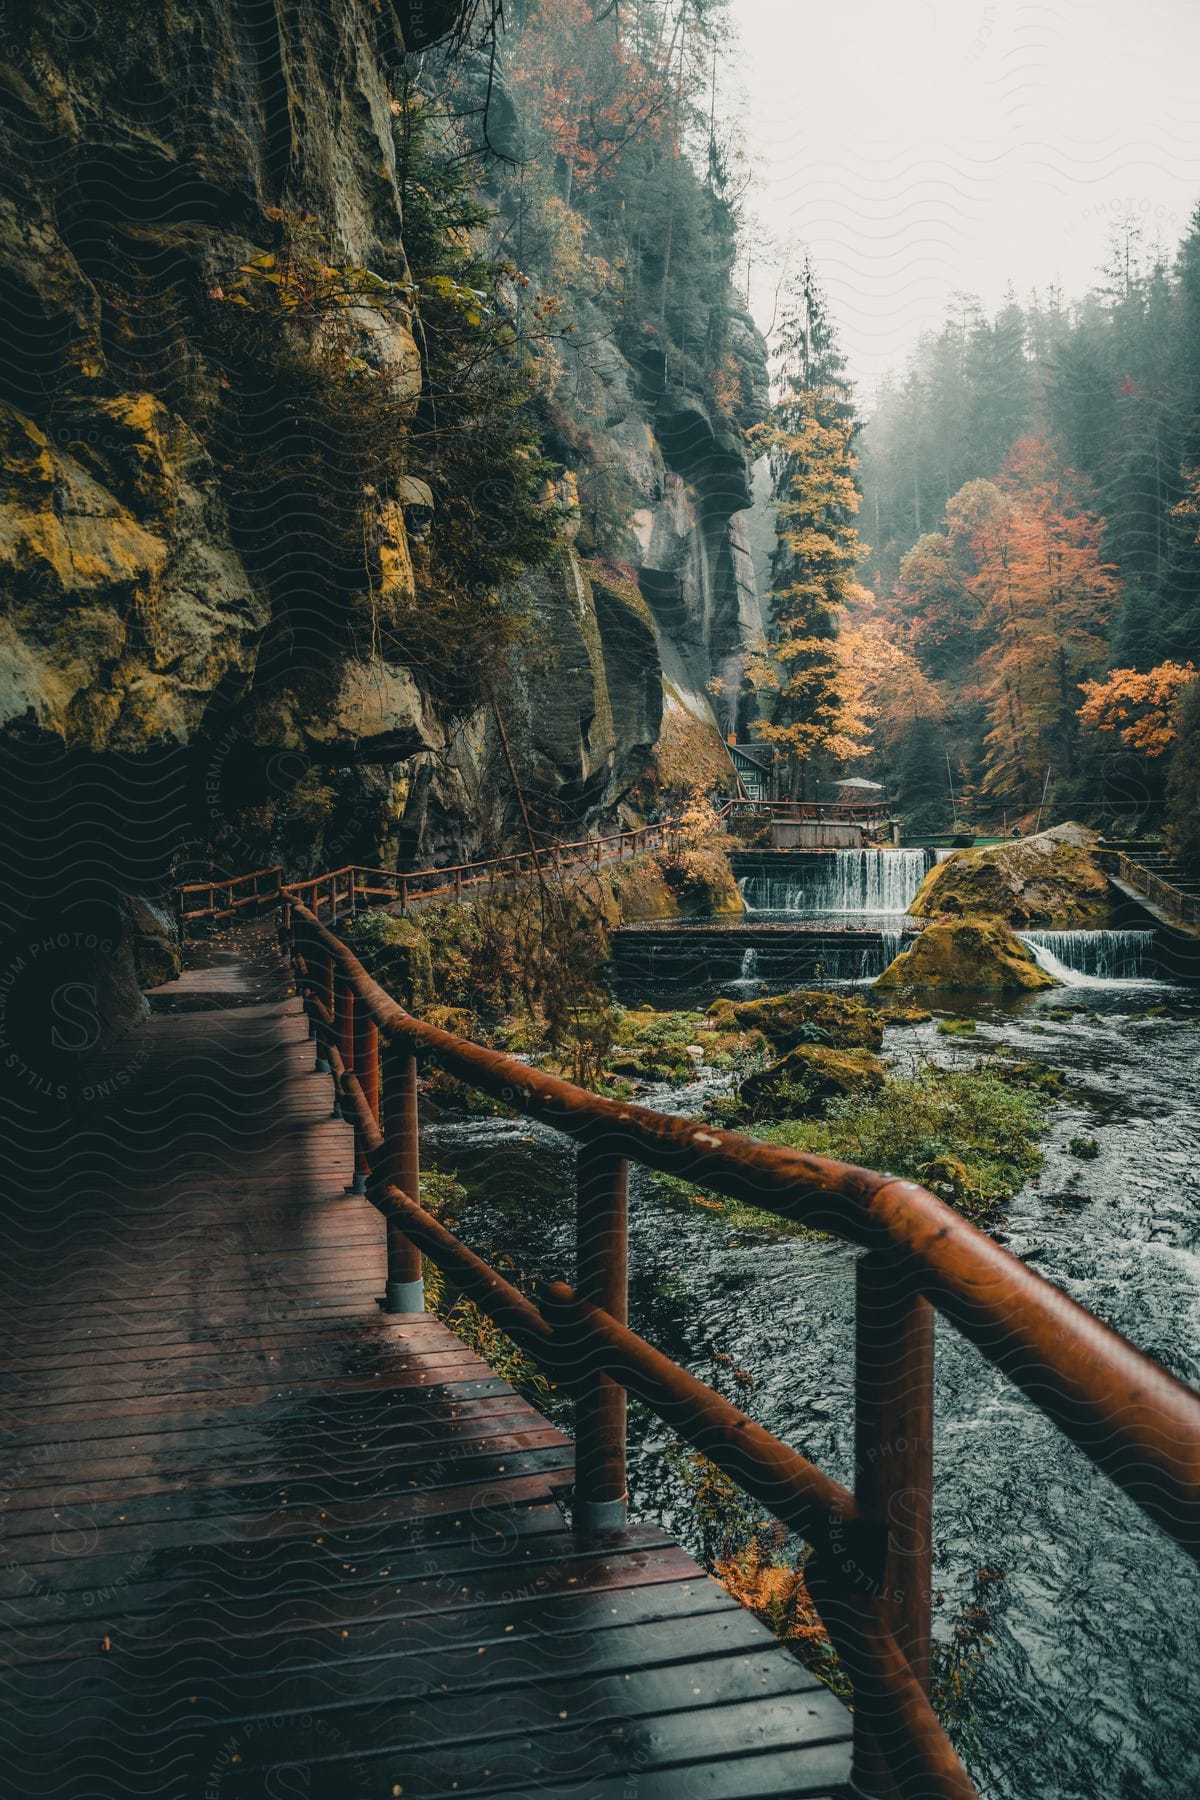 A wooden pathway leads to a waterfall next to a craggy mountainside